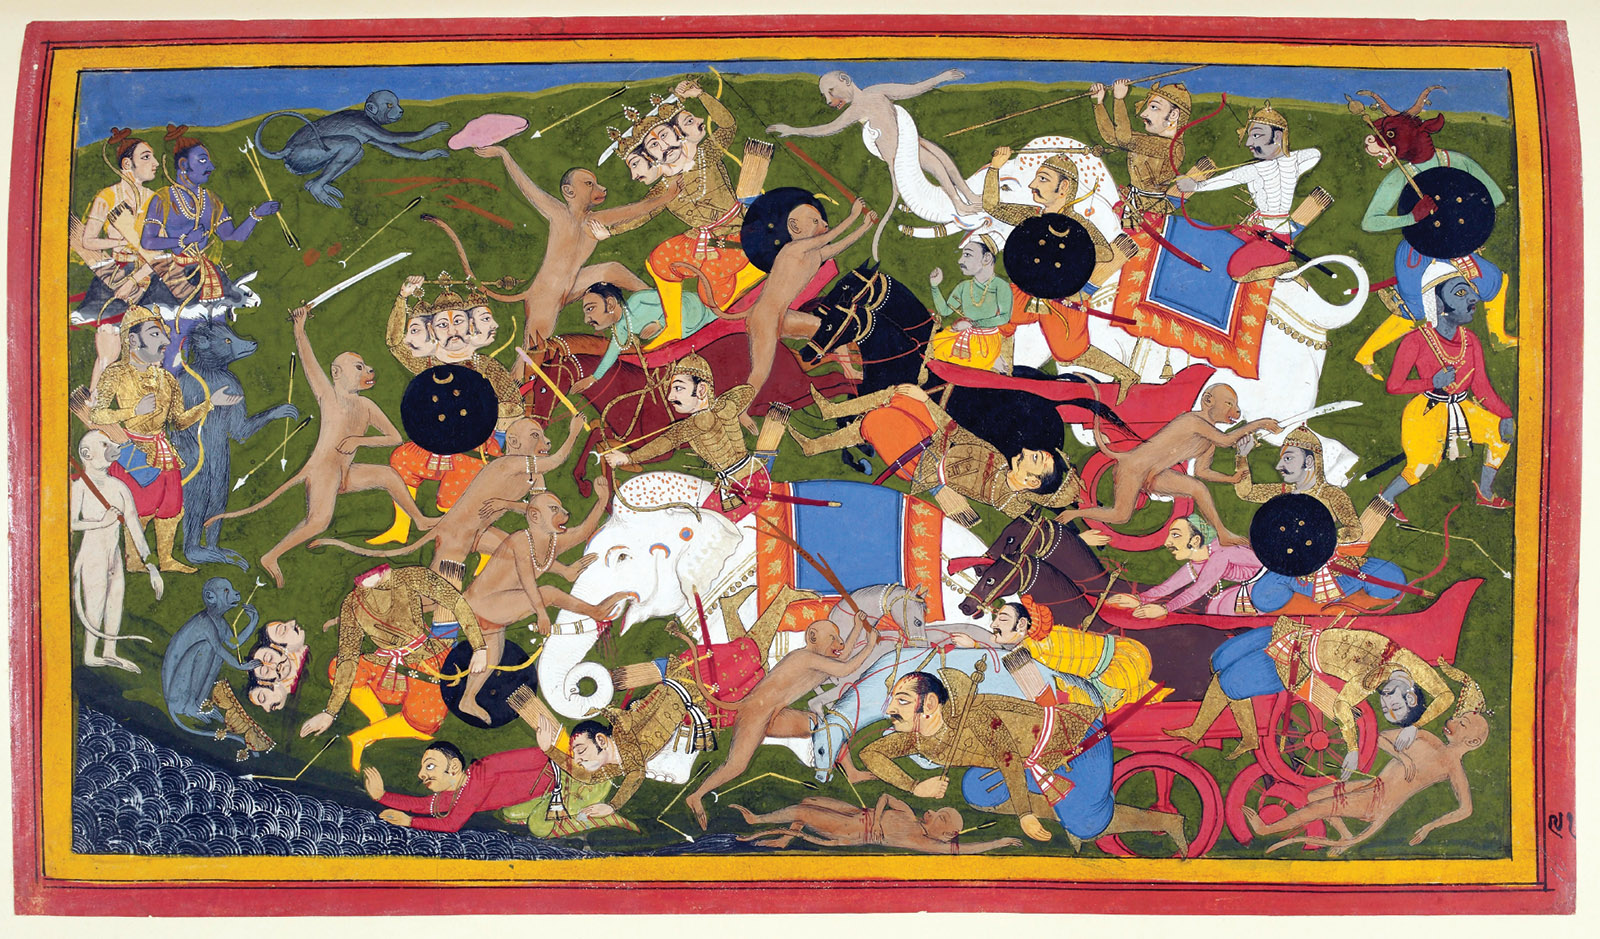 Battle between the armies of Rama and Ravana; illustration by Sahib Din from a seventeenth-century manuscript of the Ramayana